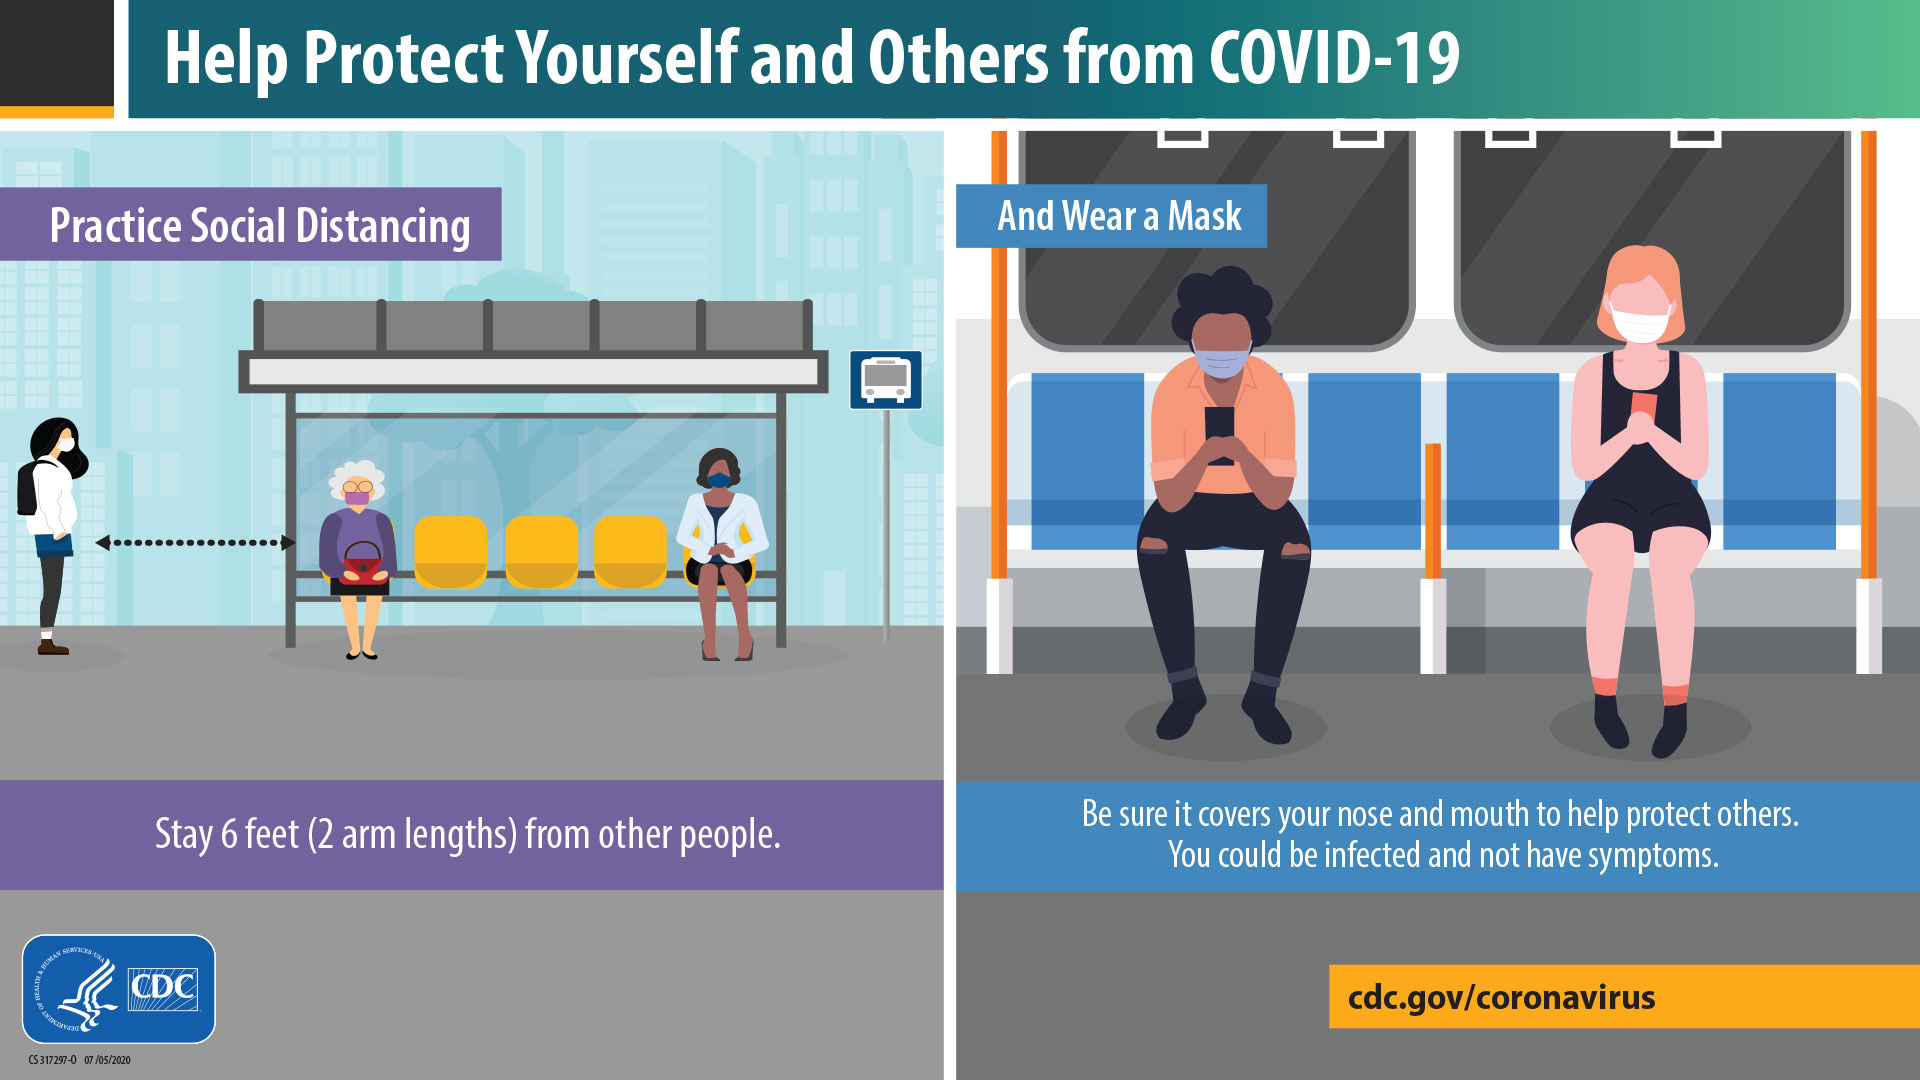 Help protect yourself and others from COVID-19